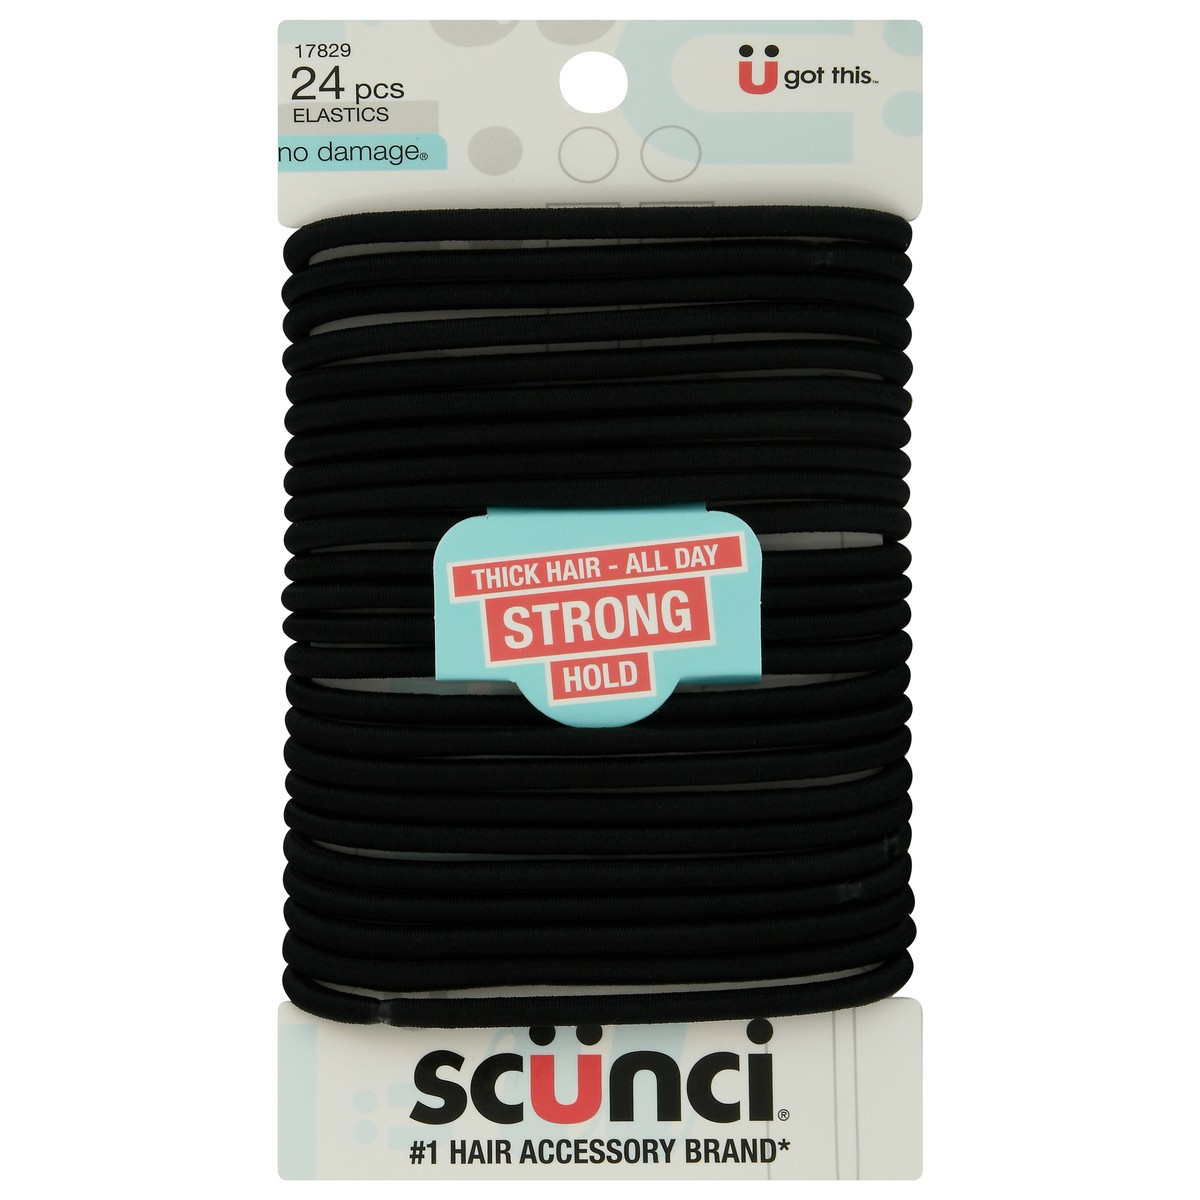 slide 1 of 9, scünci No Damage Thick Hair - All Day Strong Hold Elastics 24 ea, 24 ct